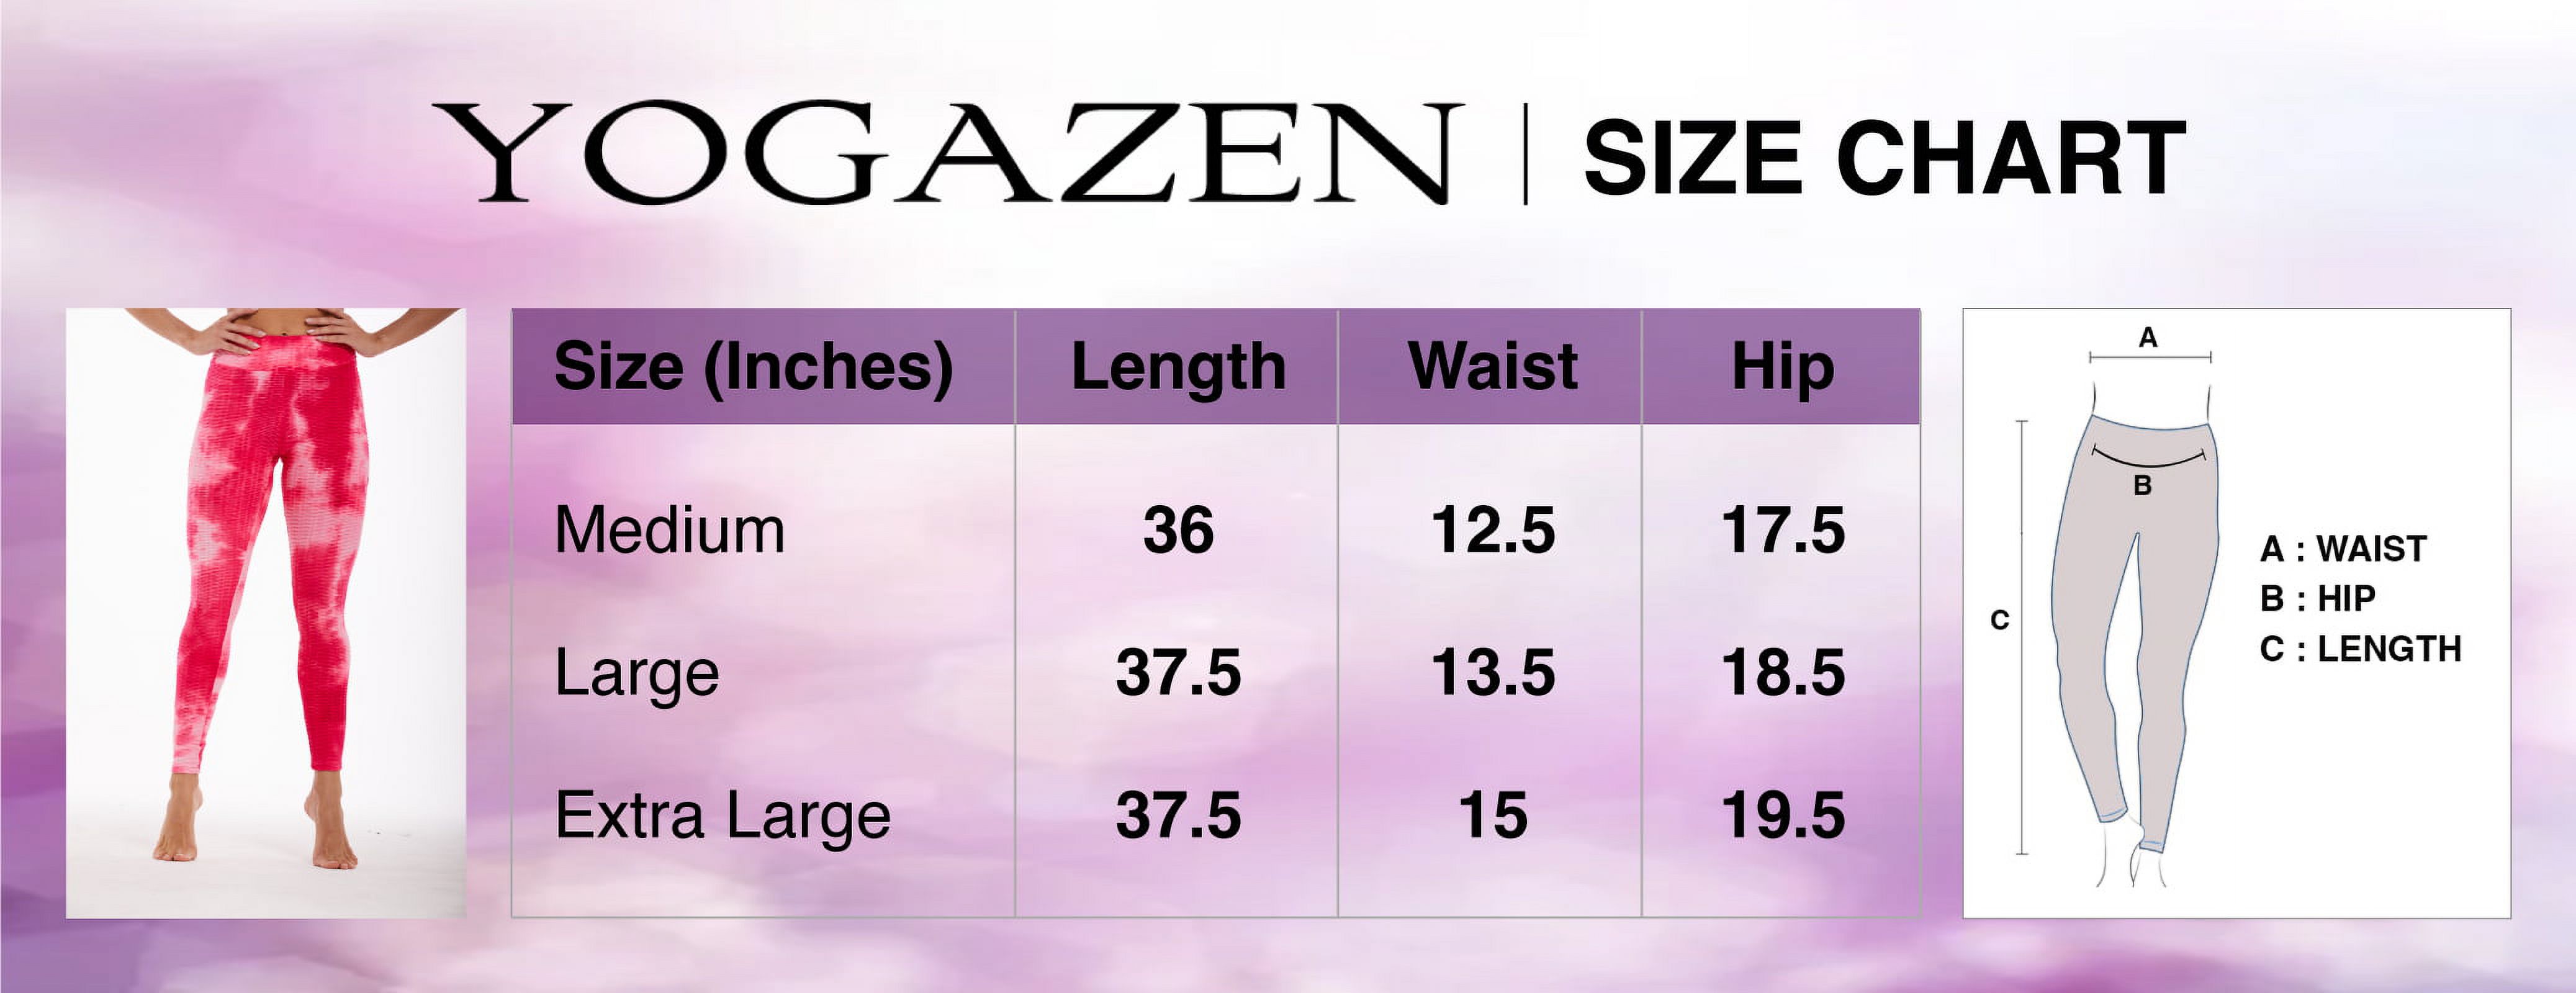 Women's Thick High Waist Yoga Exercise Stretch Stretch Pants Tummy Control Slimming Lifting Anti Cellulite Scrunch Booty Leggings Ruched Butt Textured Tights Sport Workout - image 5 of 8